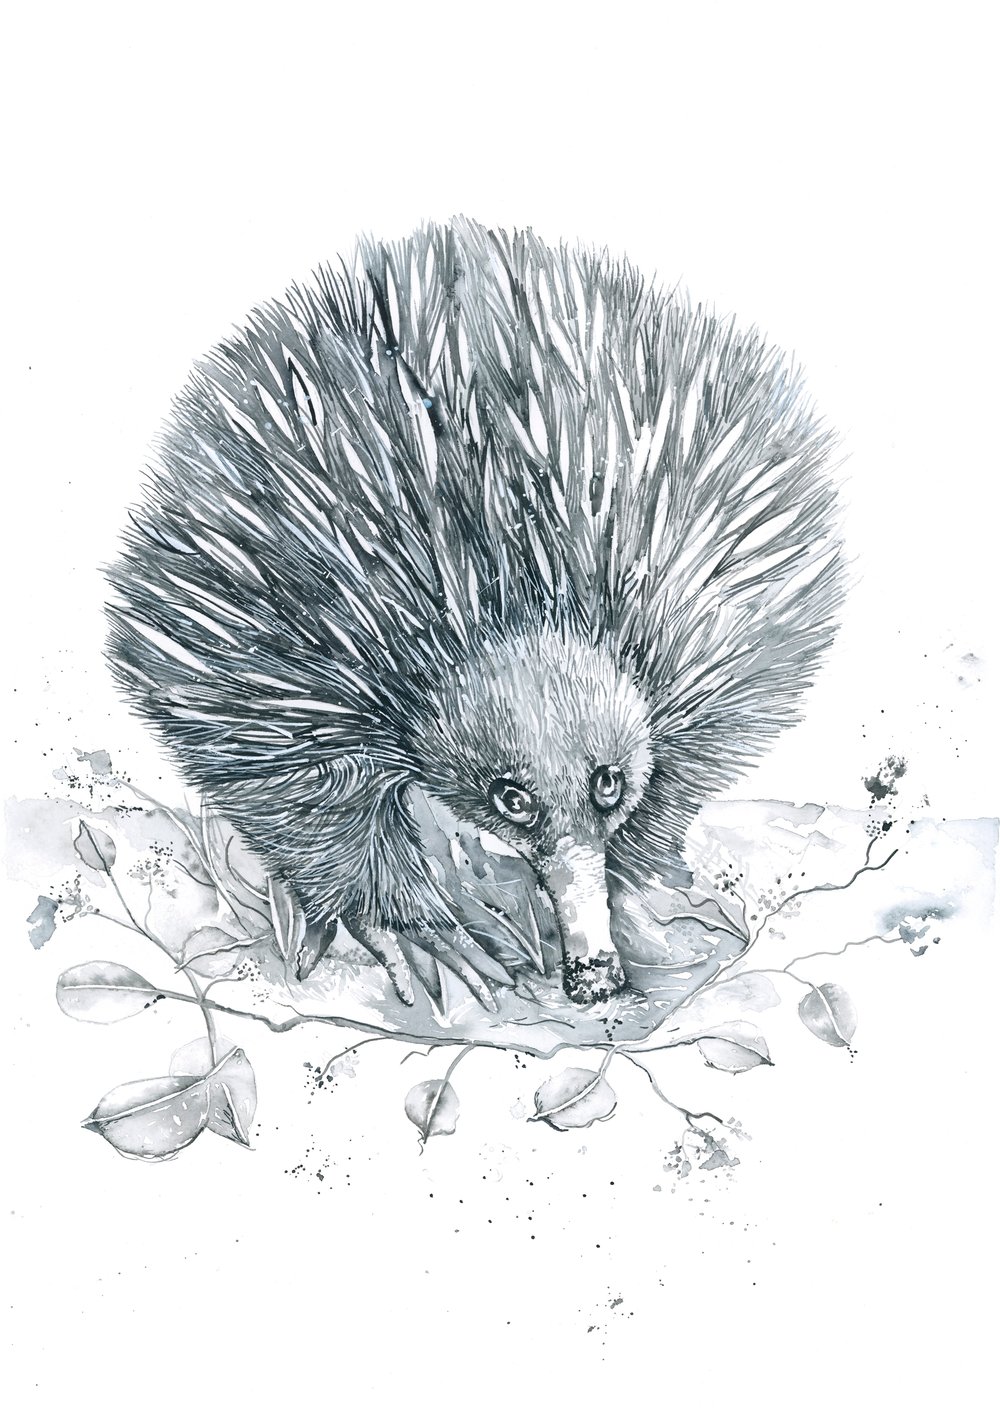 Image of Spike the baby Echidna